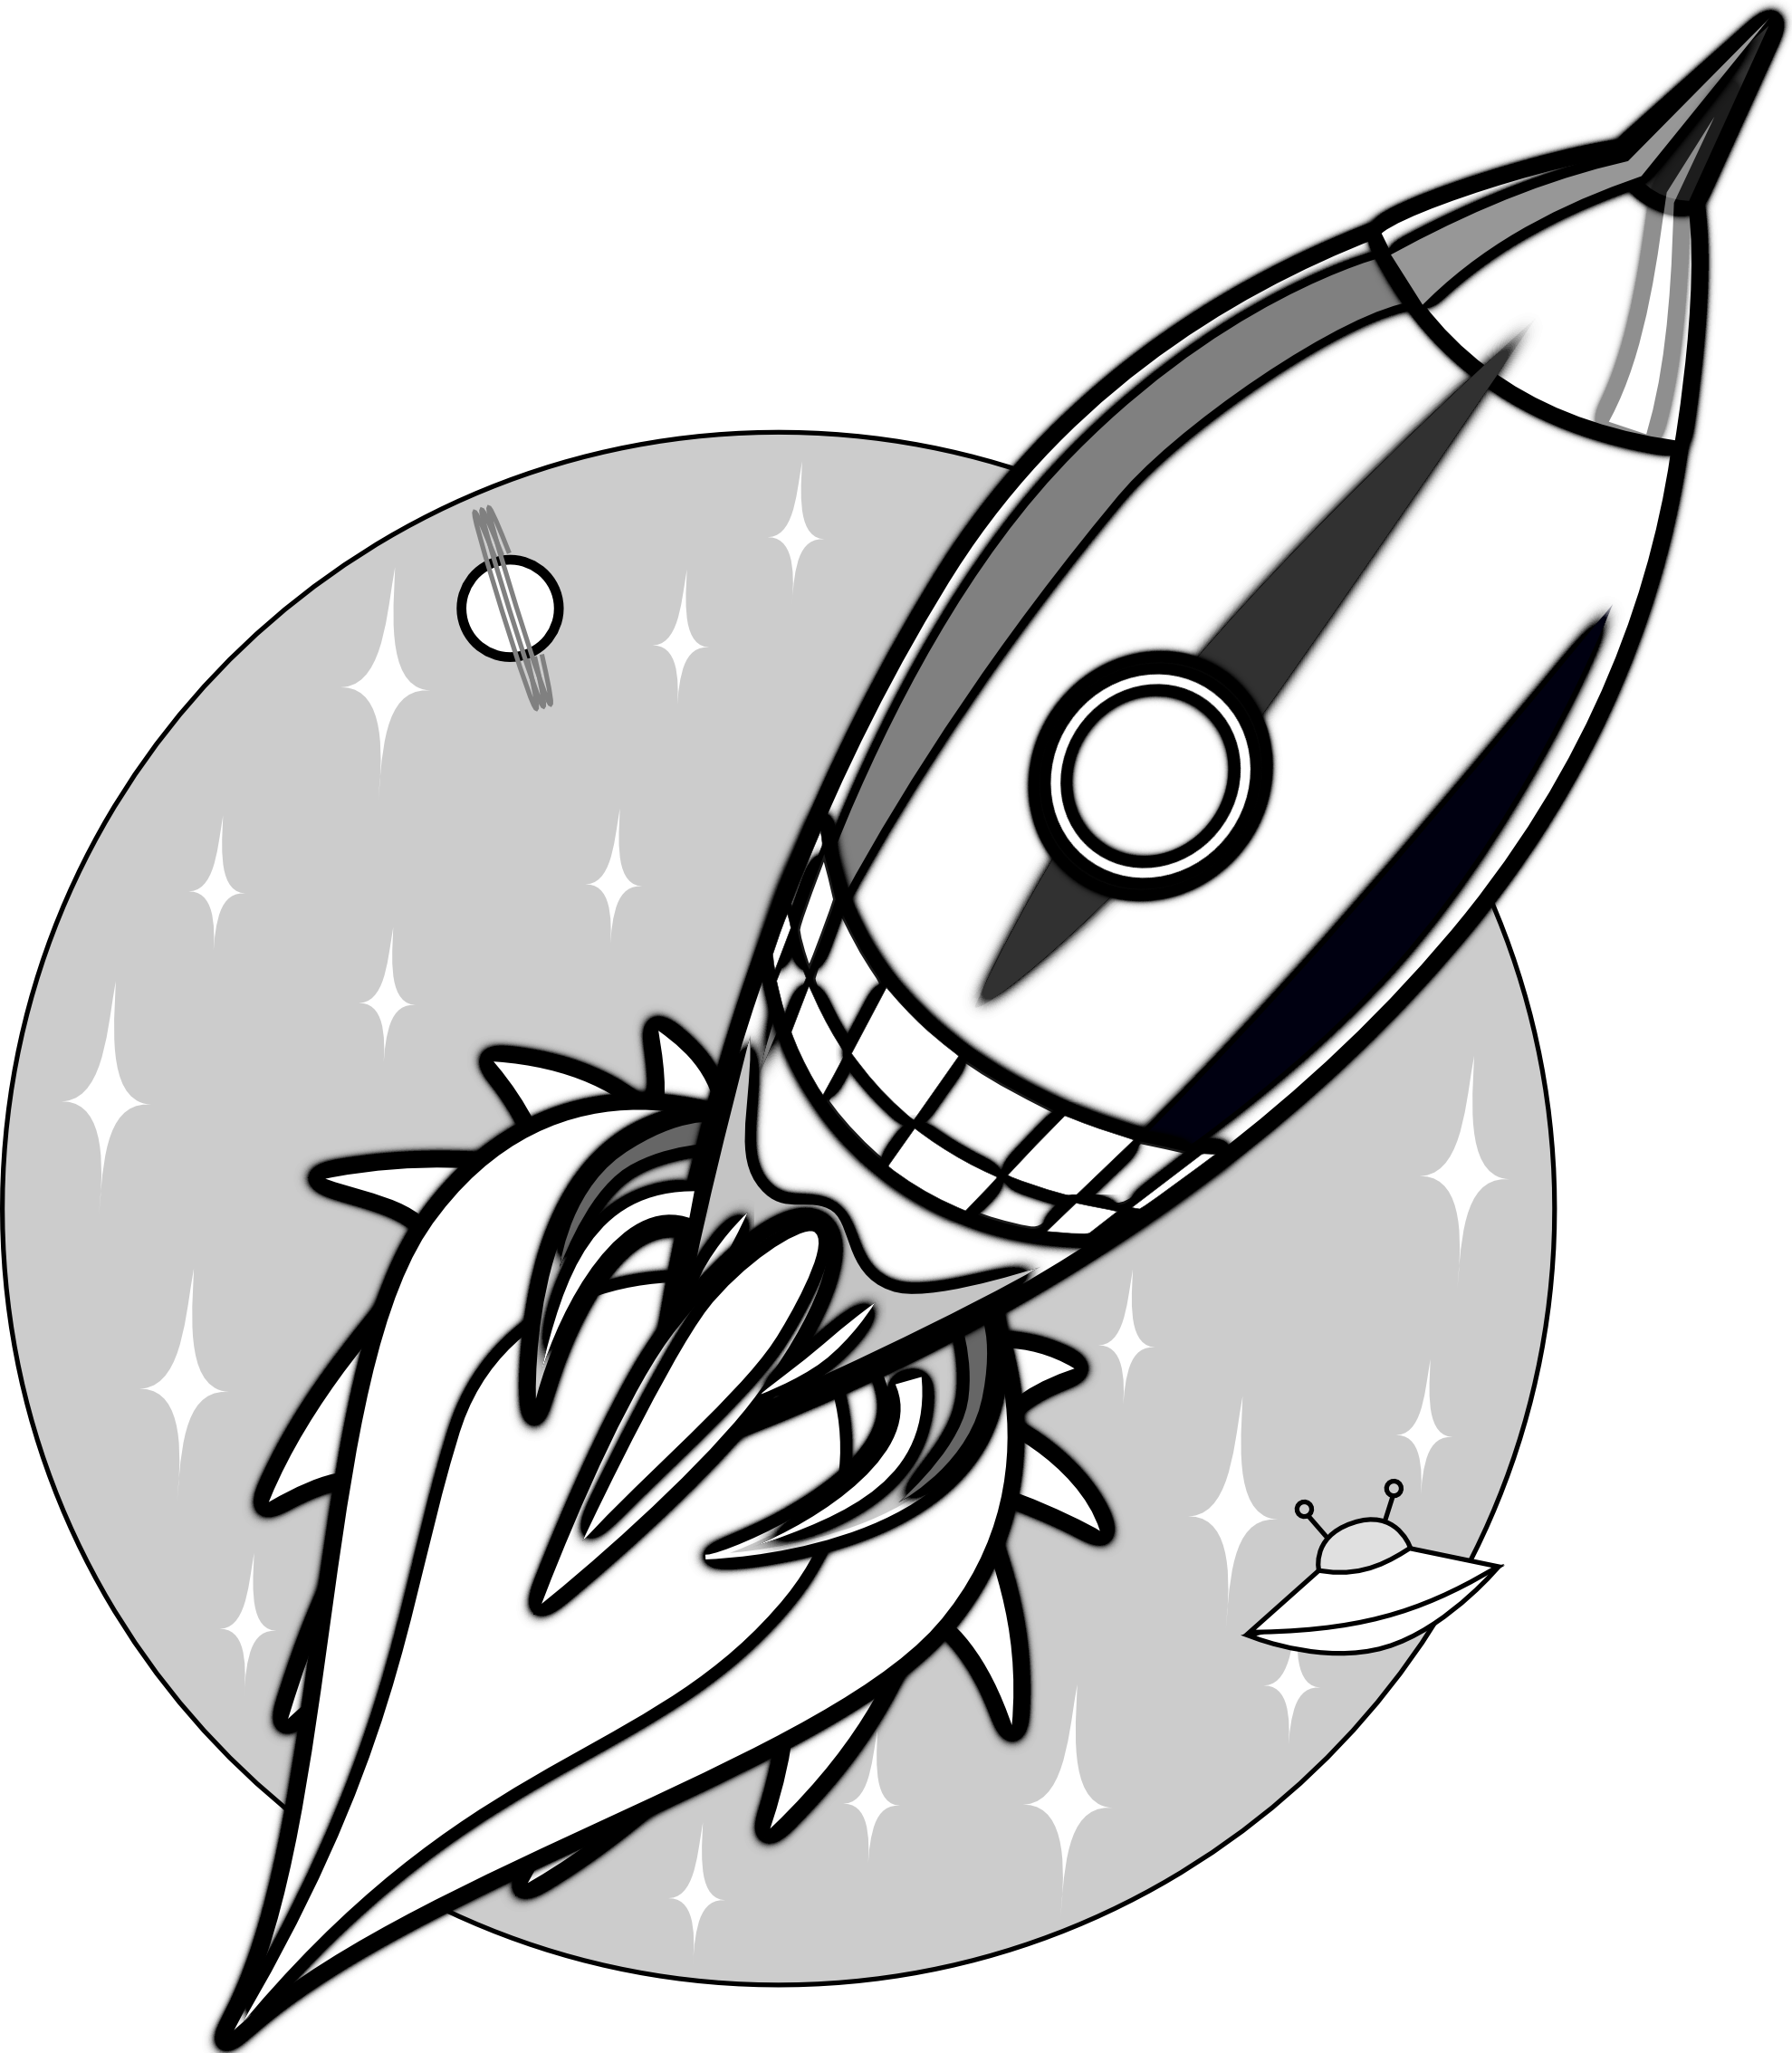 rocket ship clipart black and white - photo #11